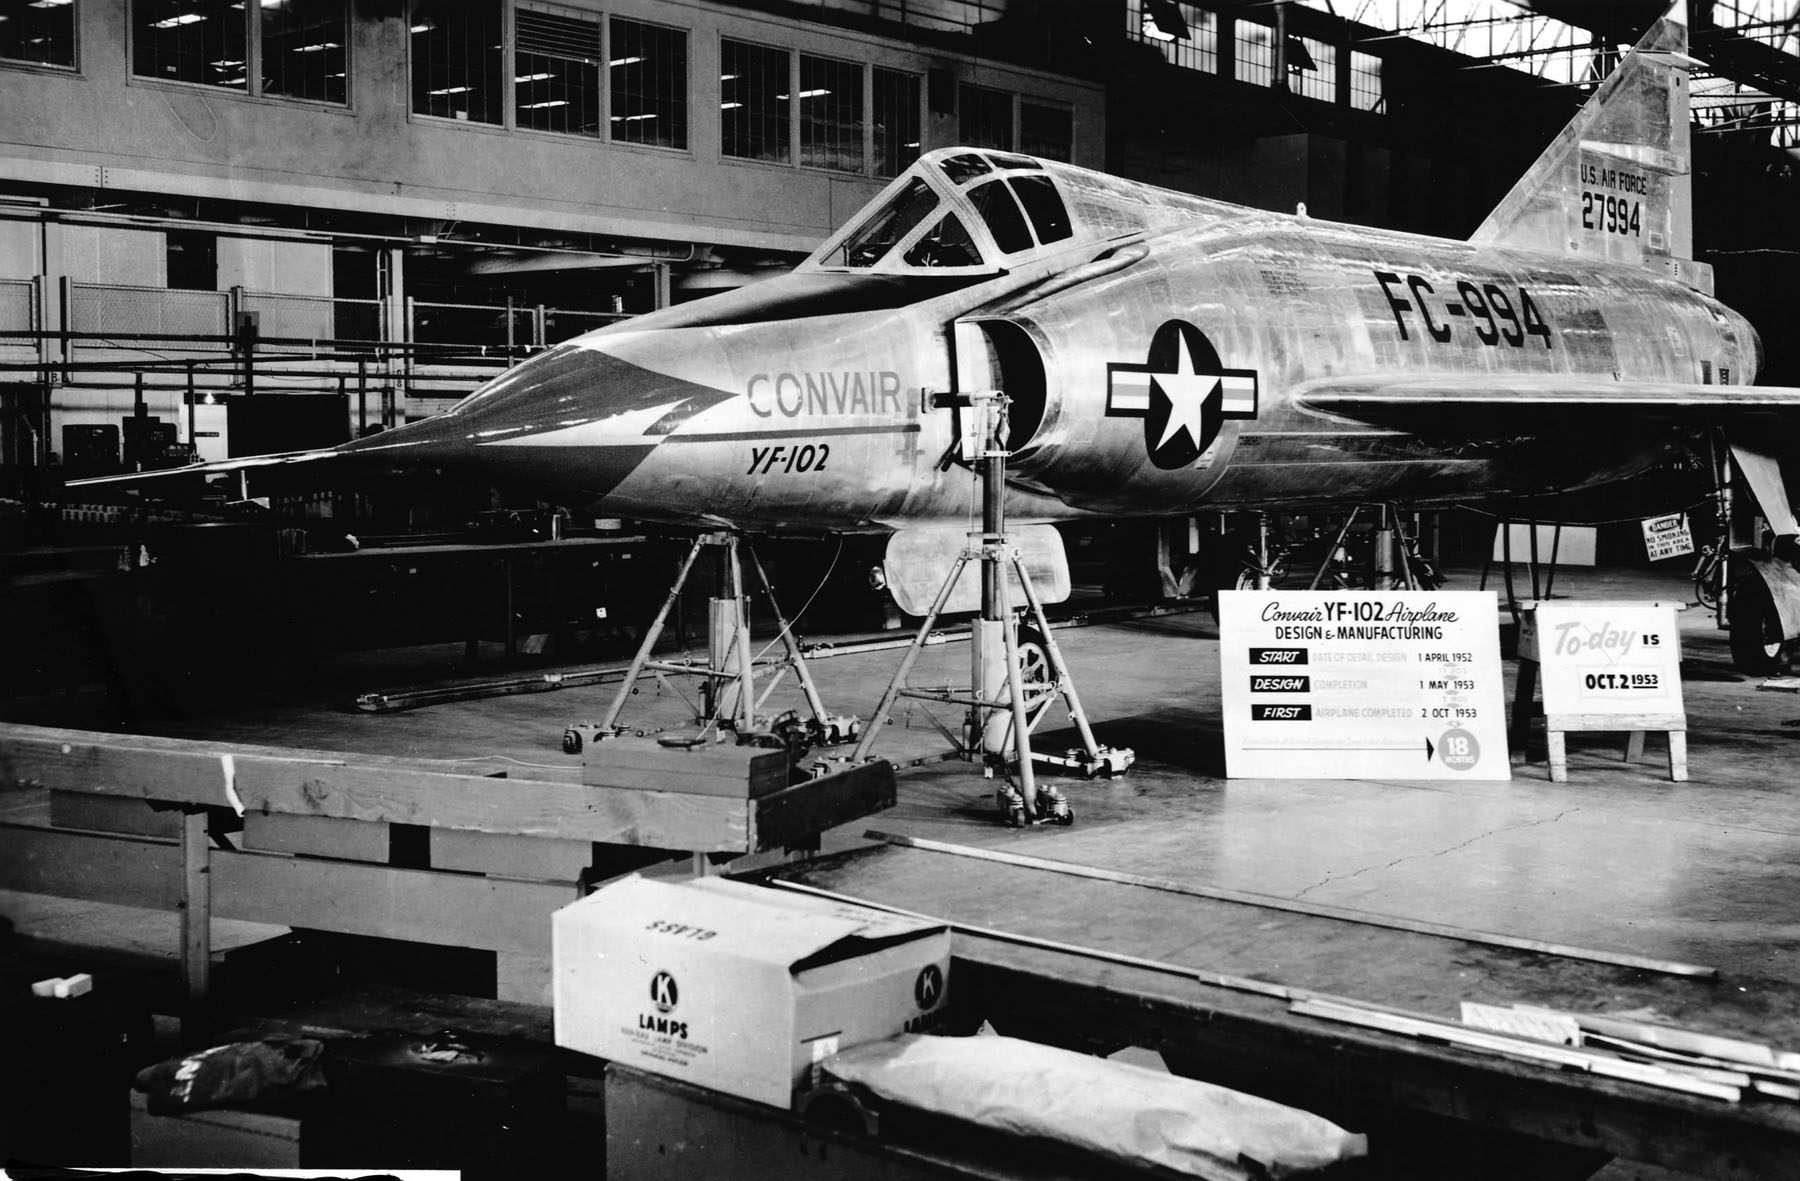 The first prototype Convair YF-102 Delta Dagger, 52-7994, was completed at the Convair plant in San Diego, 2 October 1953. (U.S. Air Force)